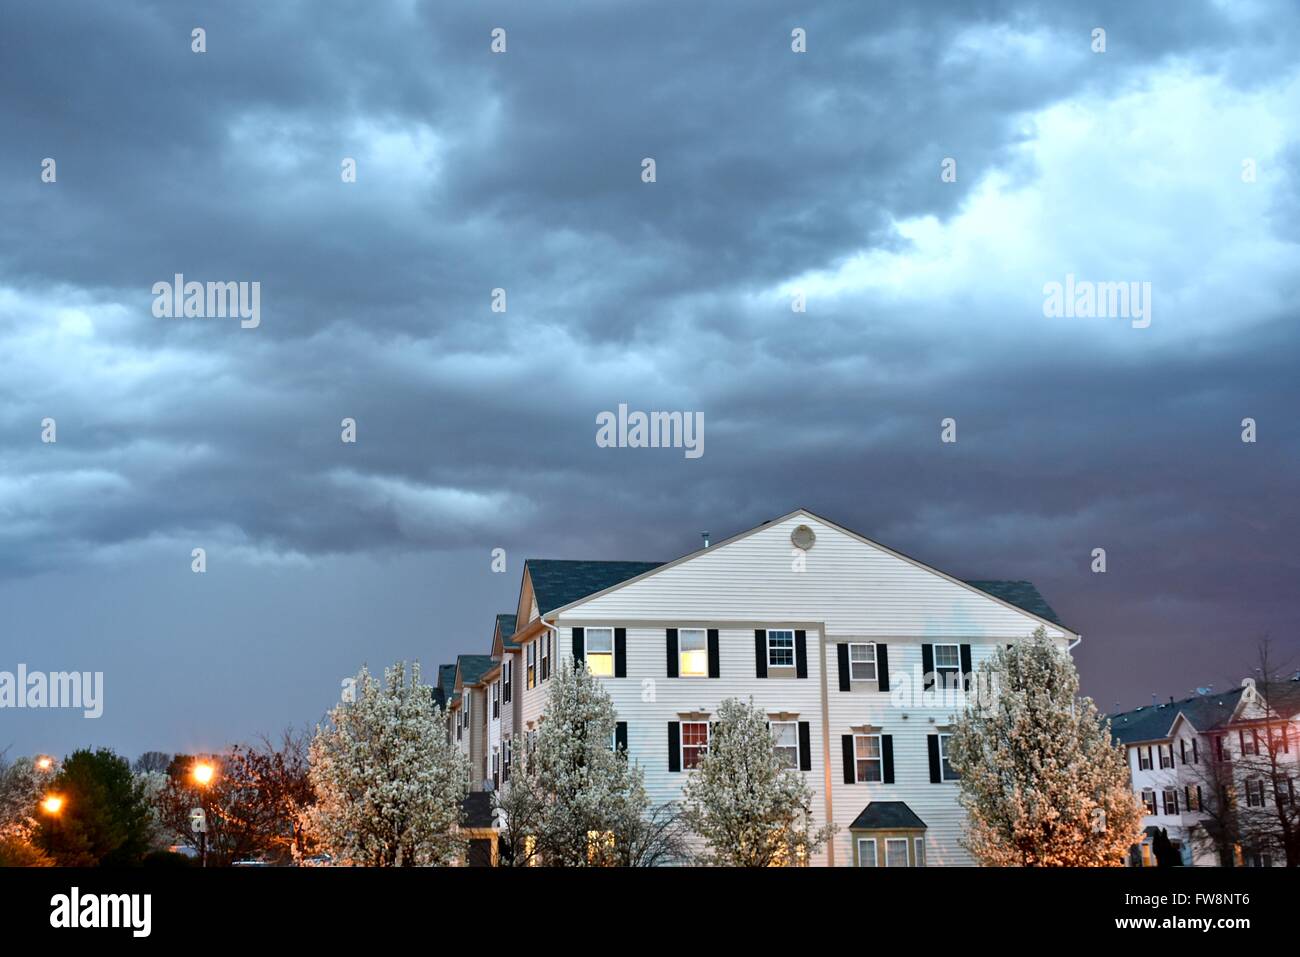 A residential community during a thunder storm Stock Photo